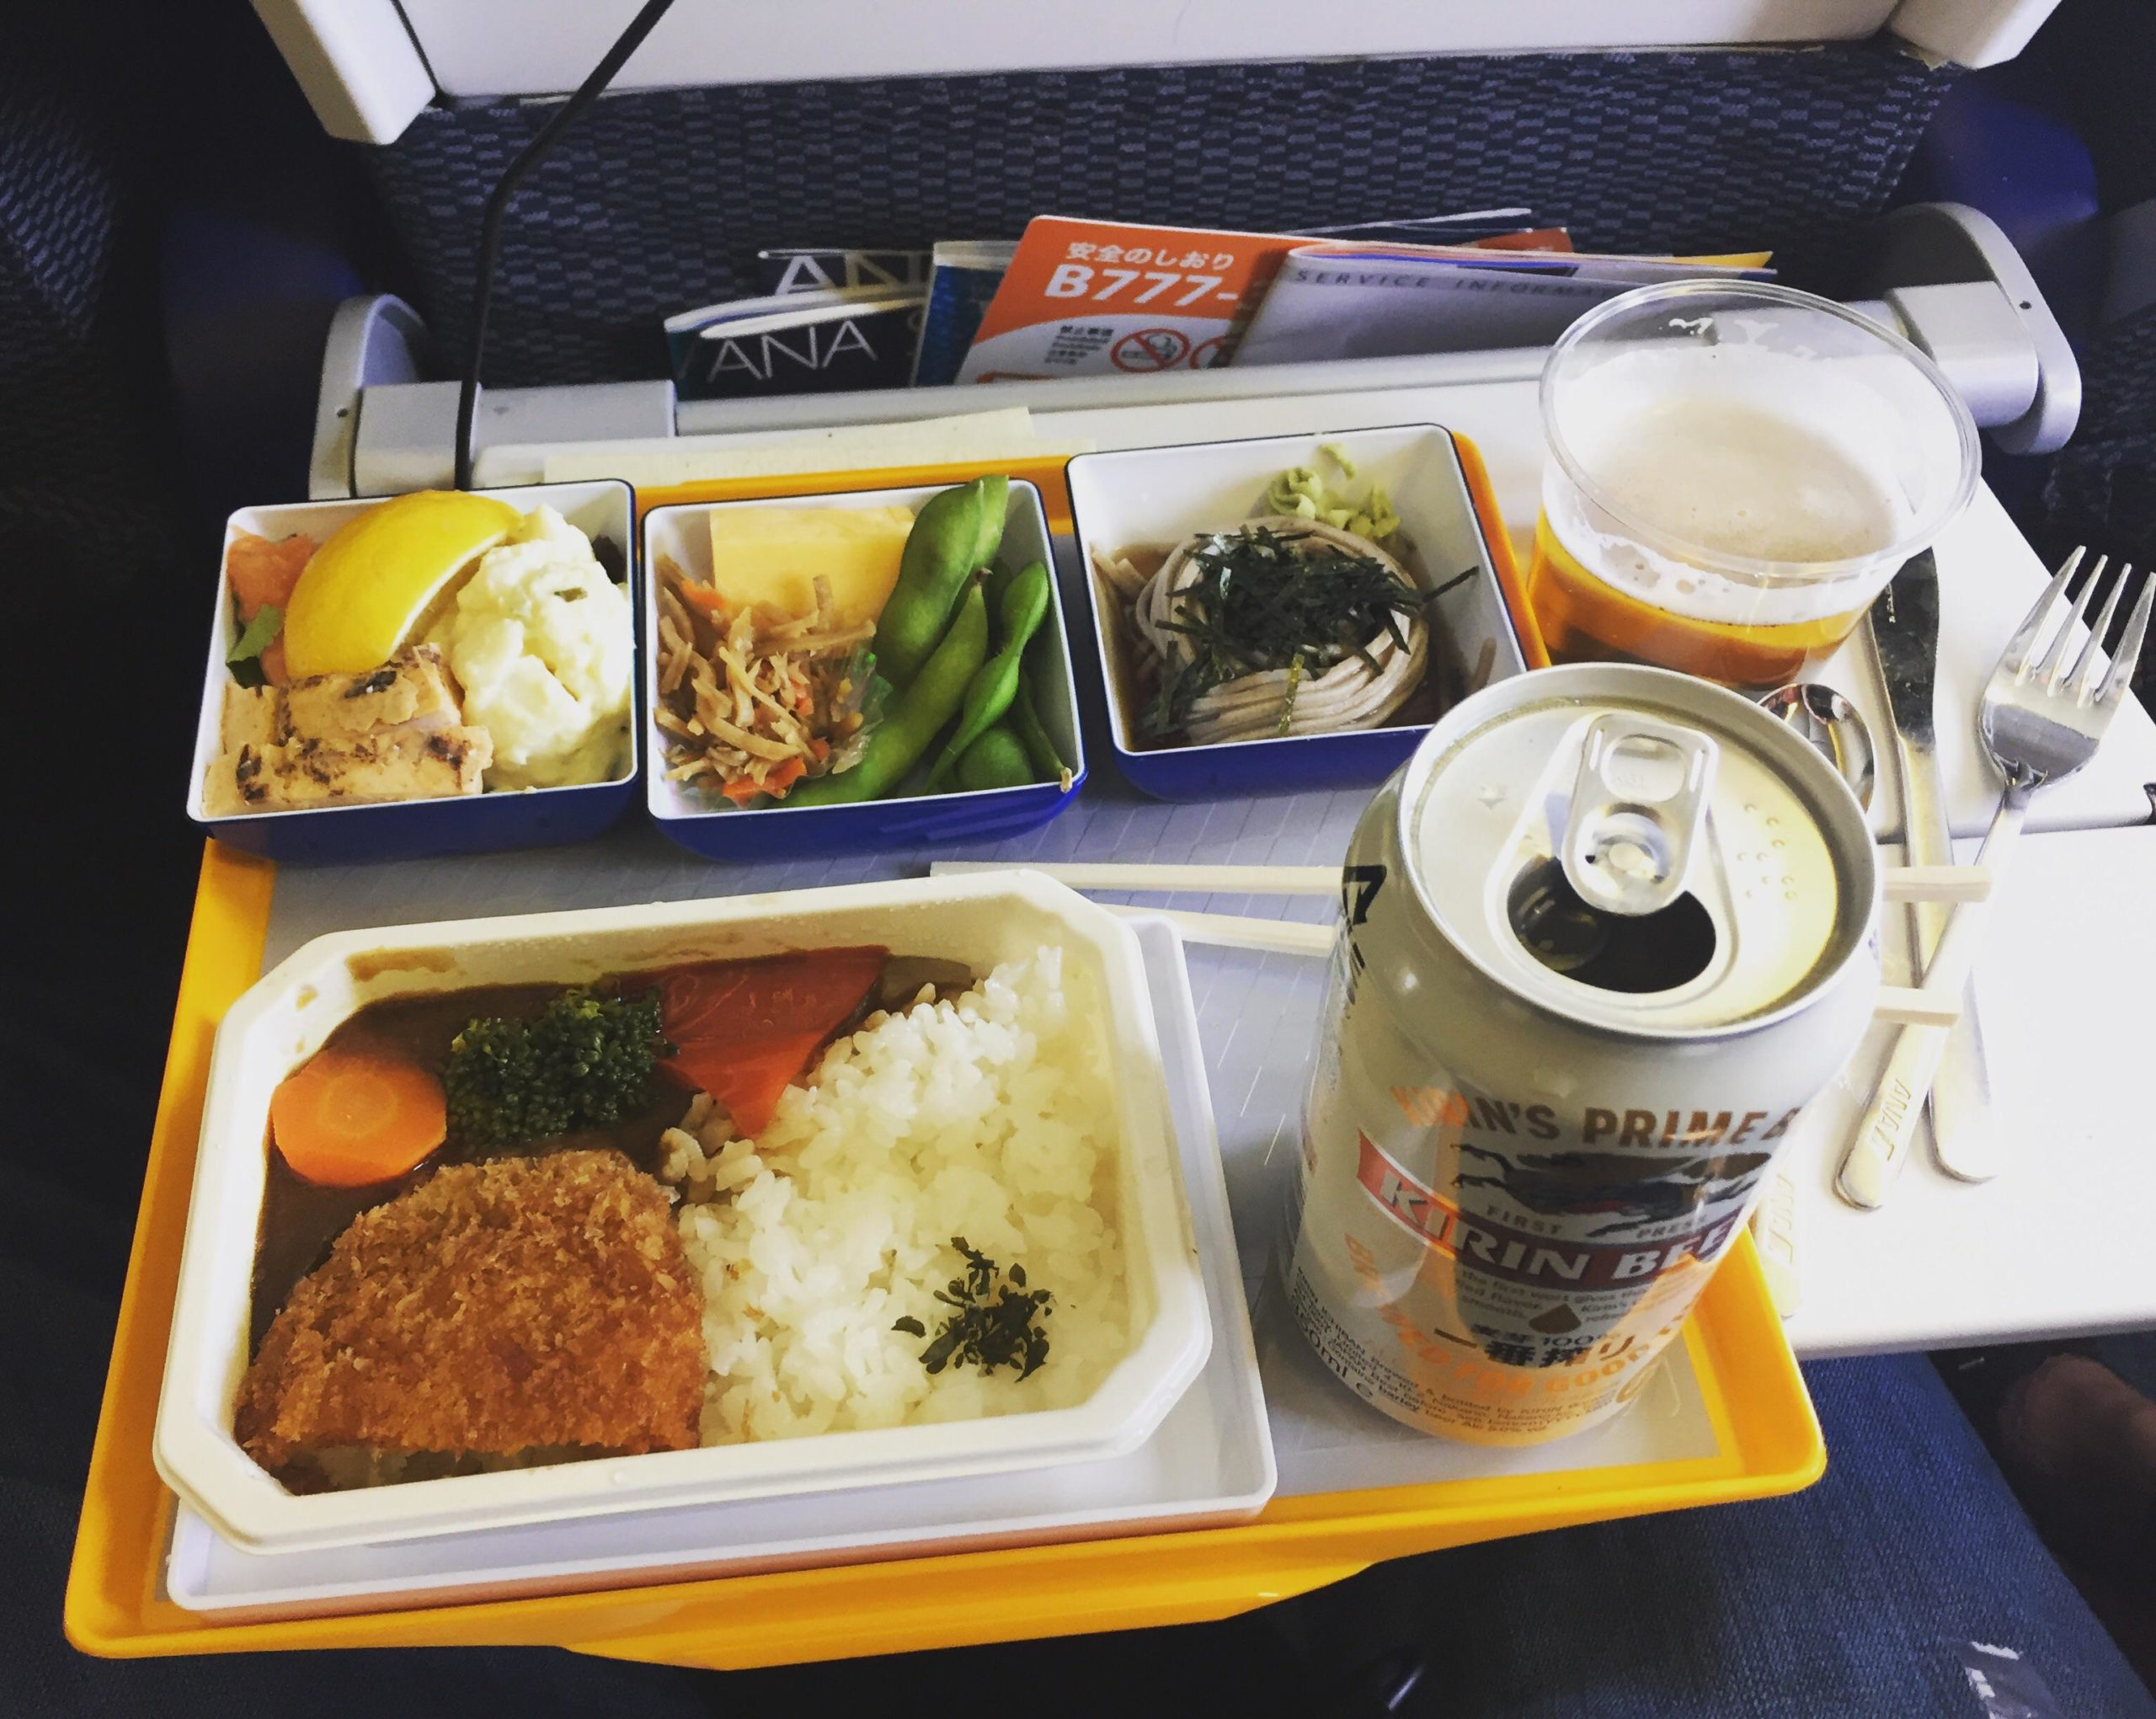 Economy+class+meal+on+Japanese+Airline